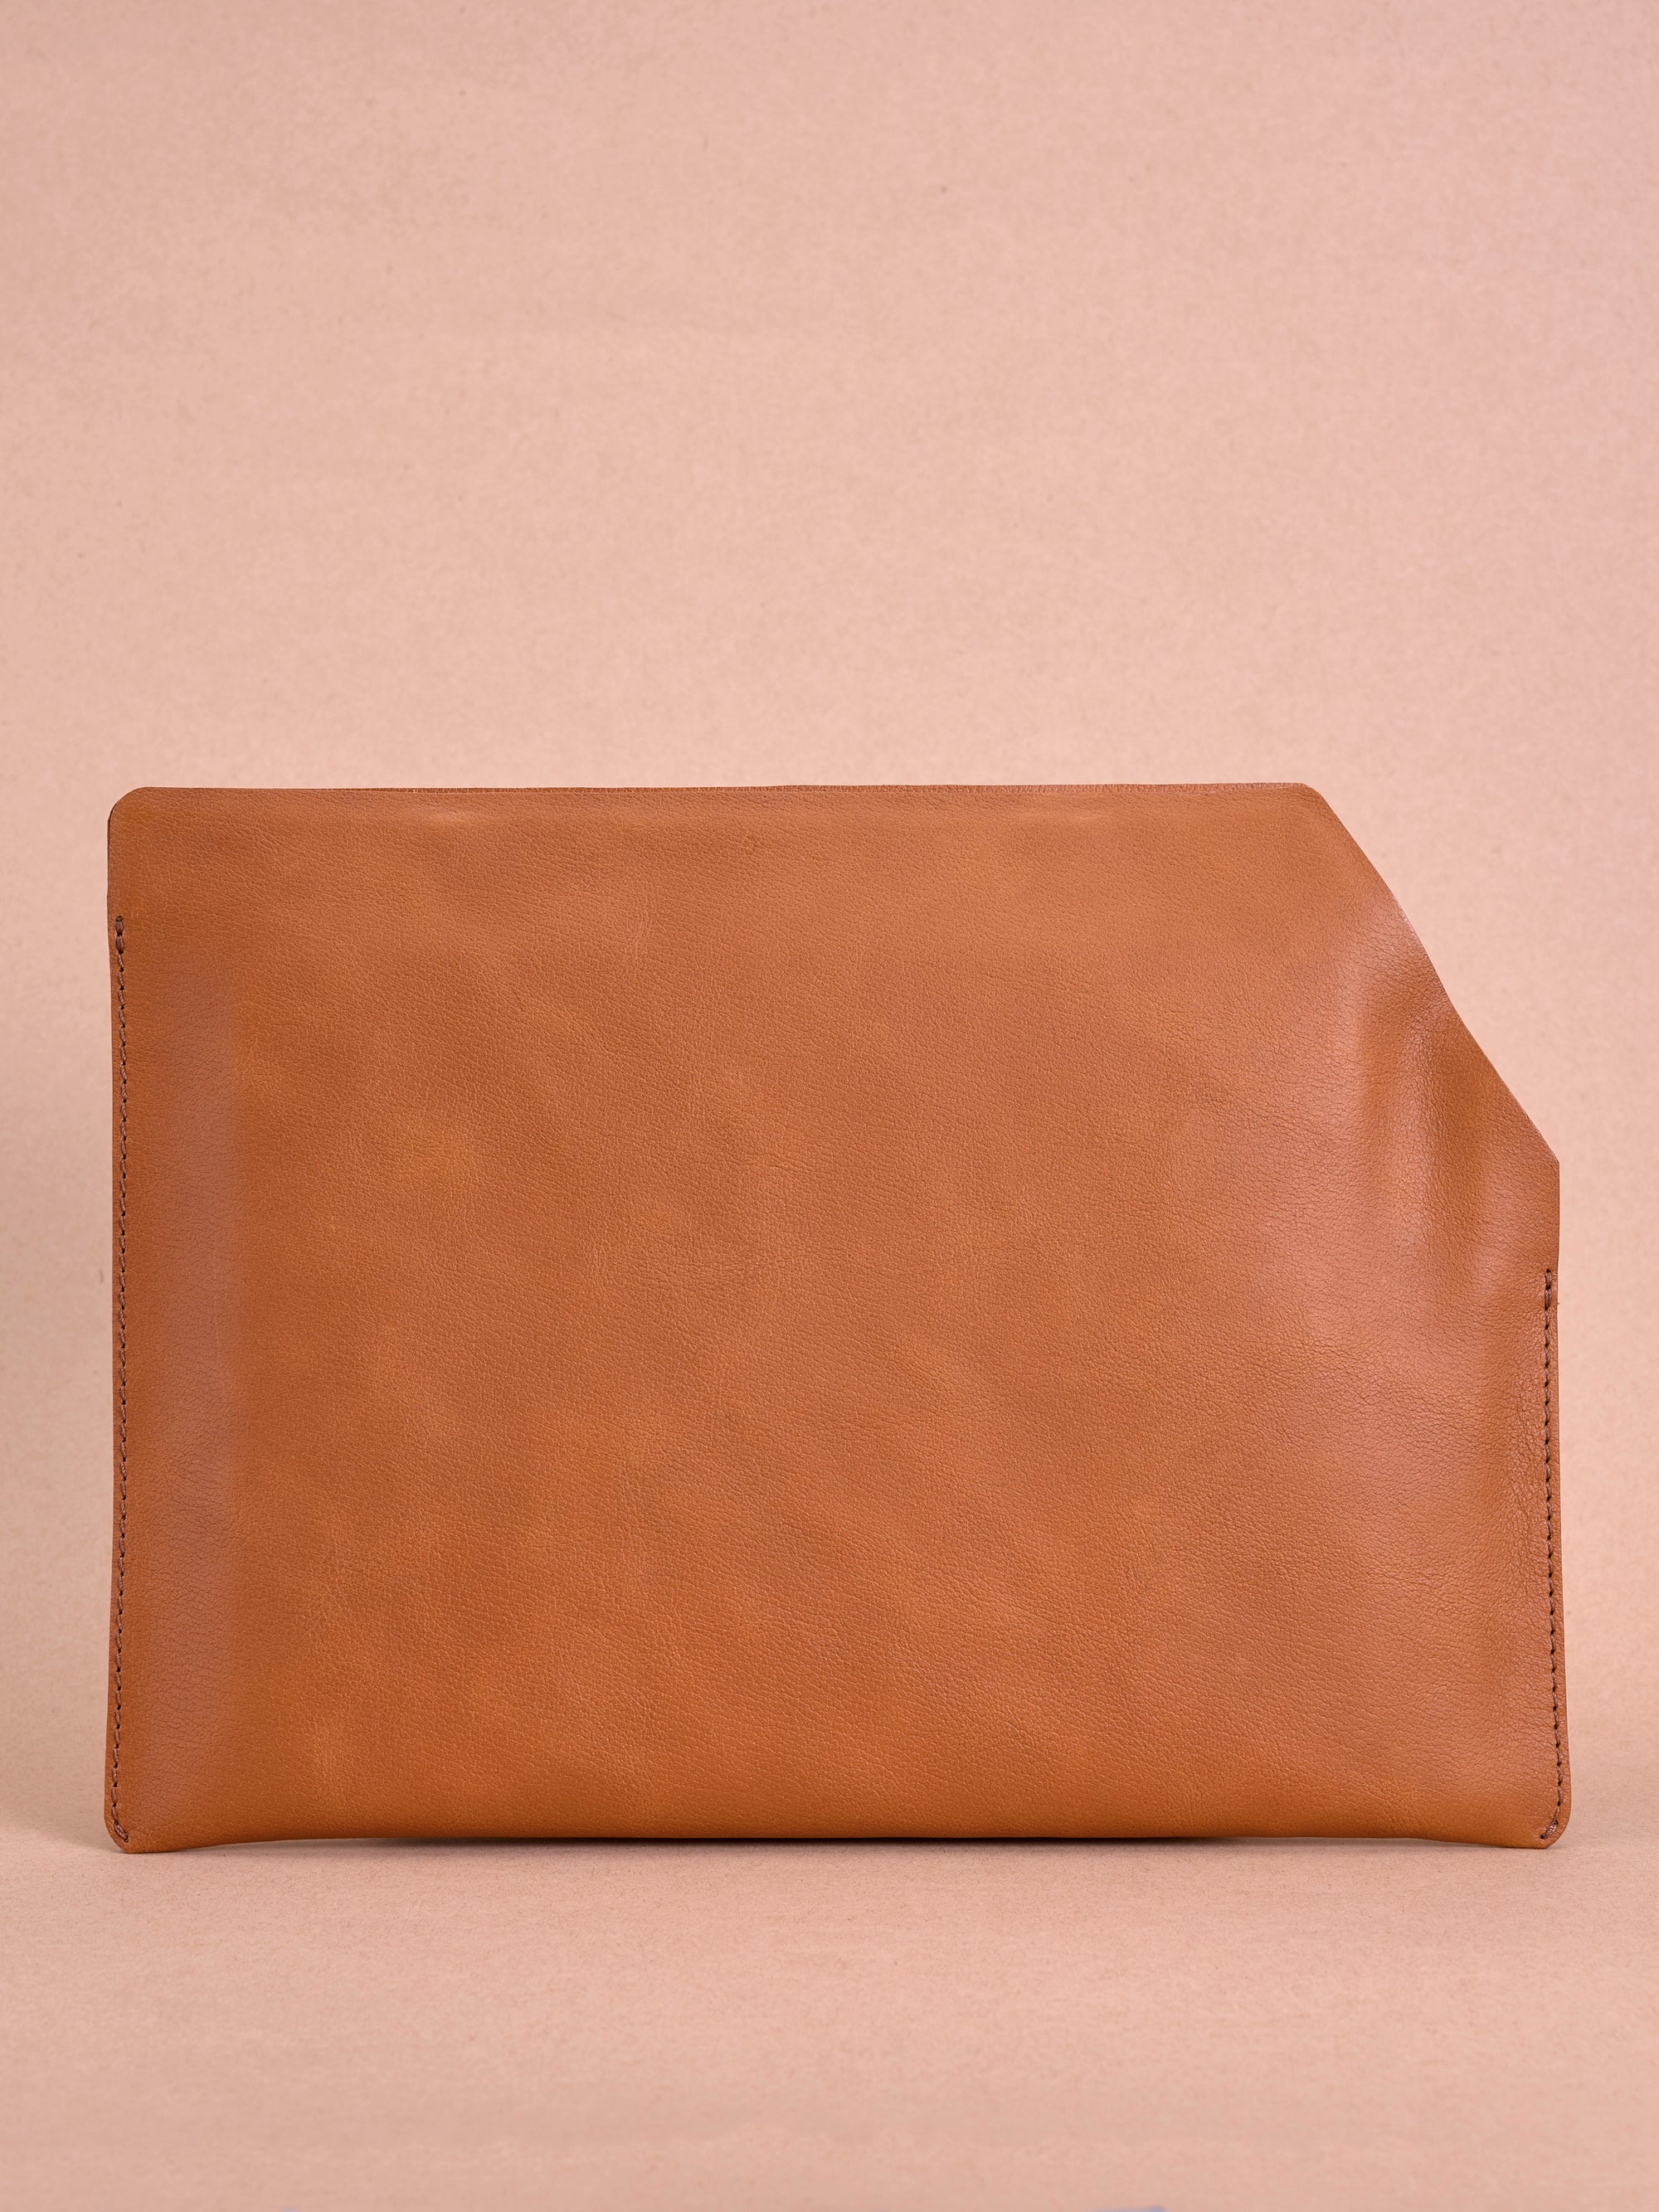 Front view. Draftsman 7 iPad Sleeve Cover Tan, iPad Pro 11-inch, iPad Pro 12.9-inch, M1 Chip by Capra Leather